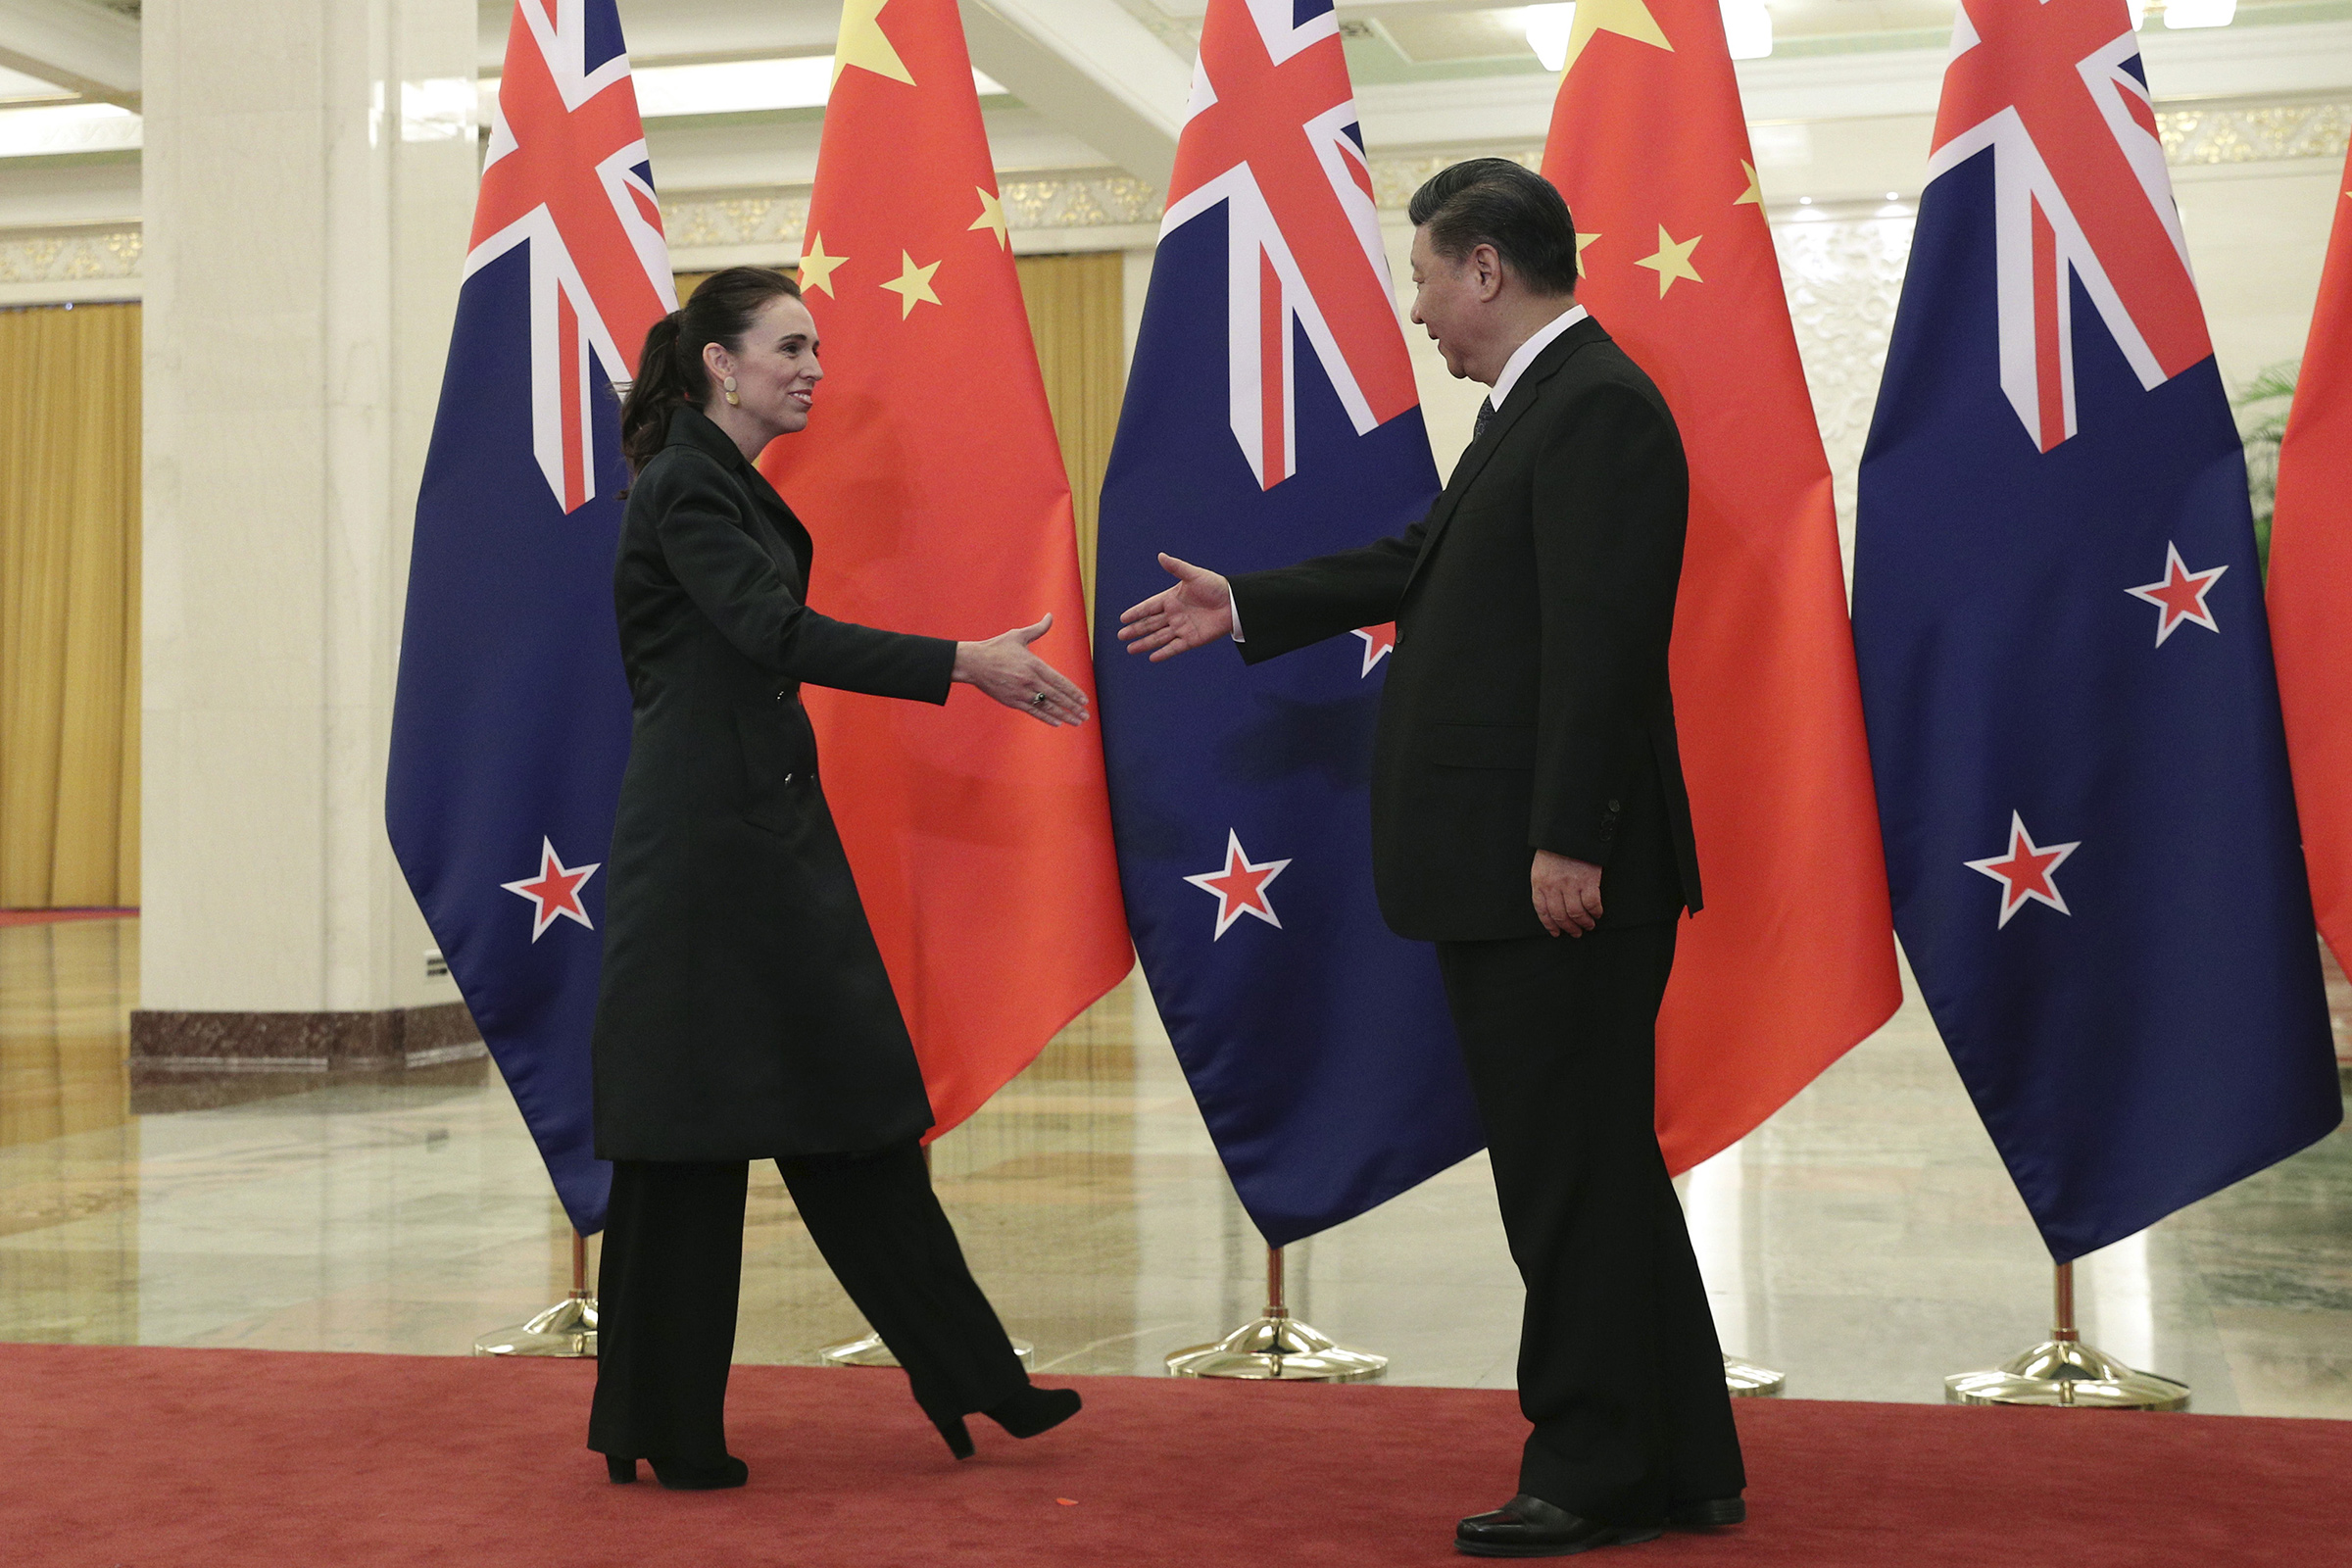 “China sees in New Zealand a sincere friend and cooperation partner,” Chinese President Xi Jinping said in April